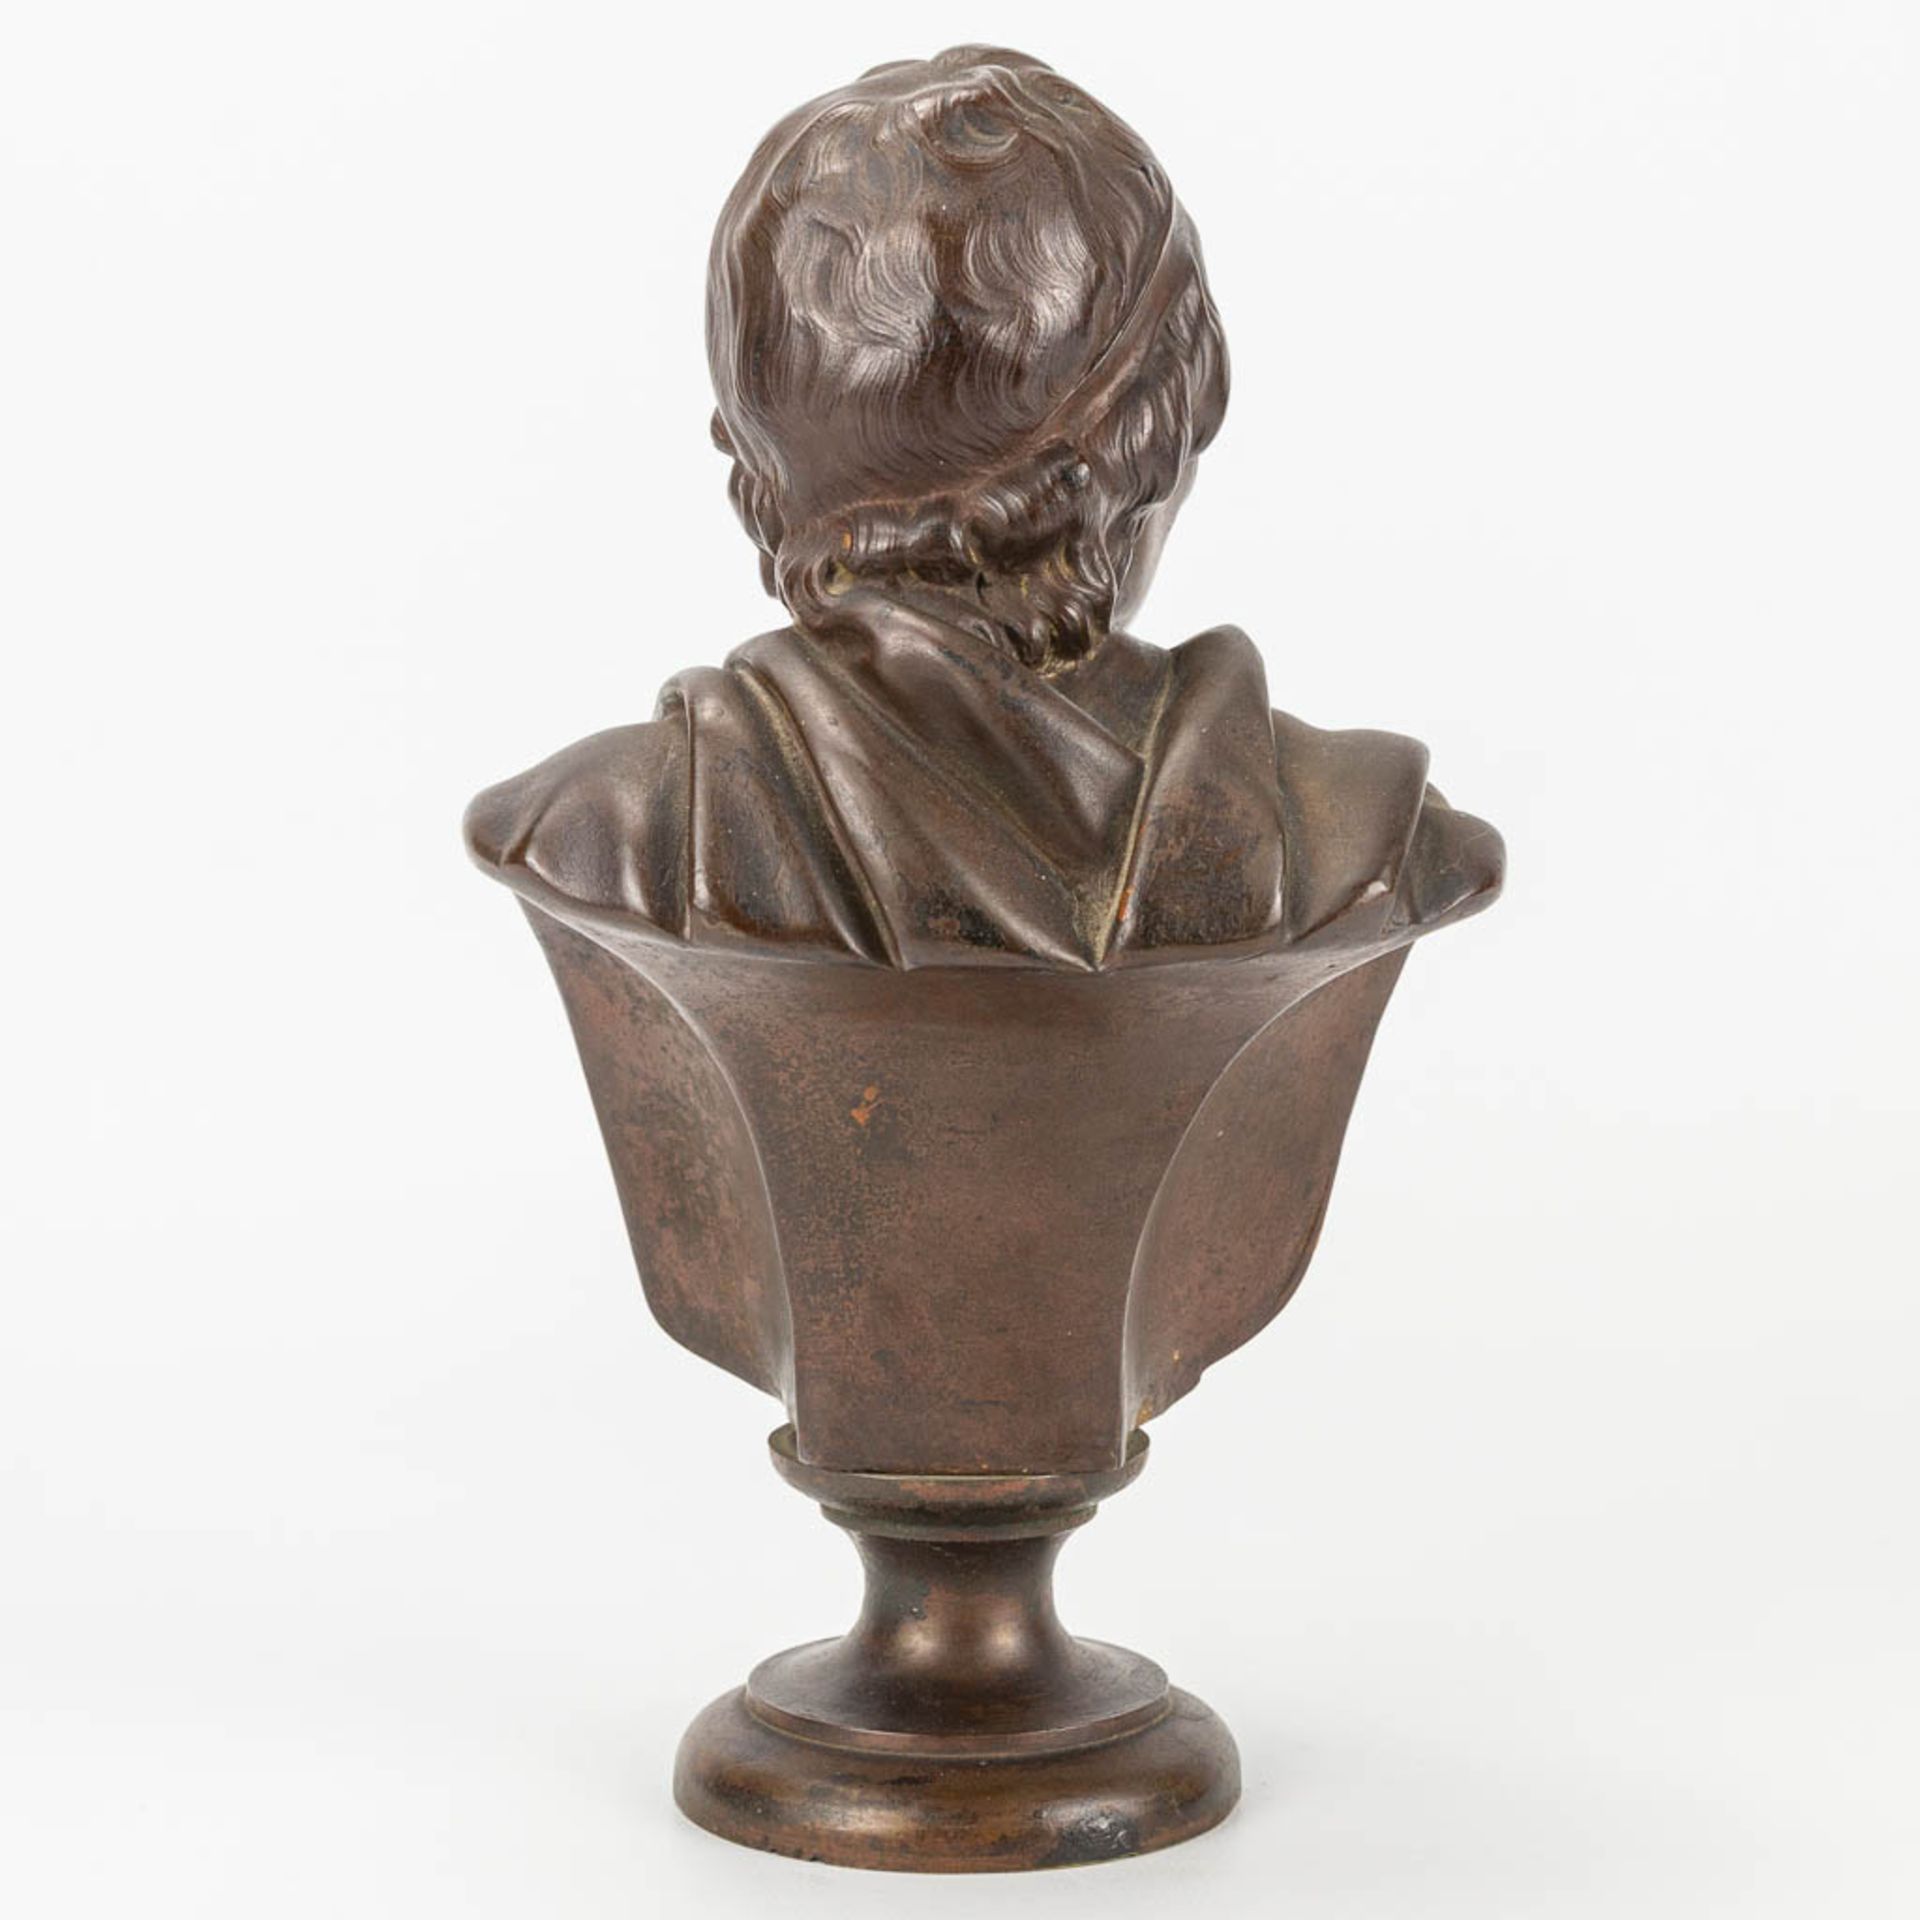 A bust of Voltaire made of bronze. 19th century. - Image 7 of 9